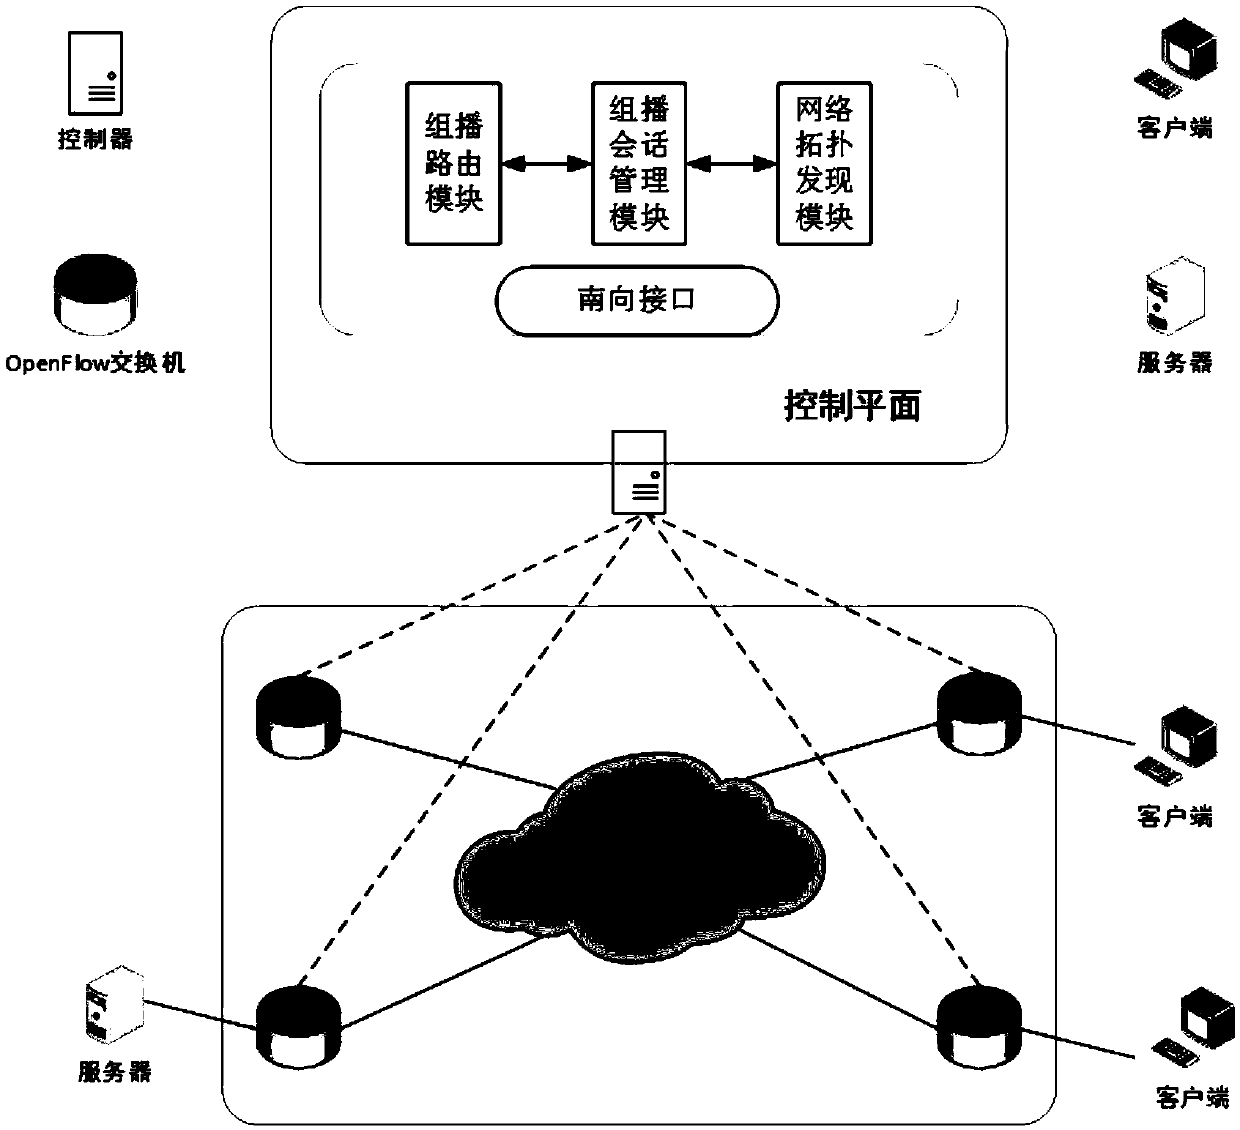 Scalable video stream multicast method based on QoS intelligent perception in SDN environment